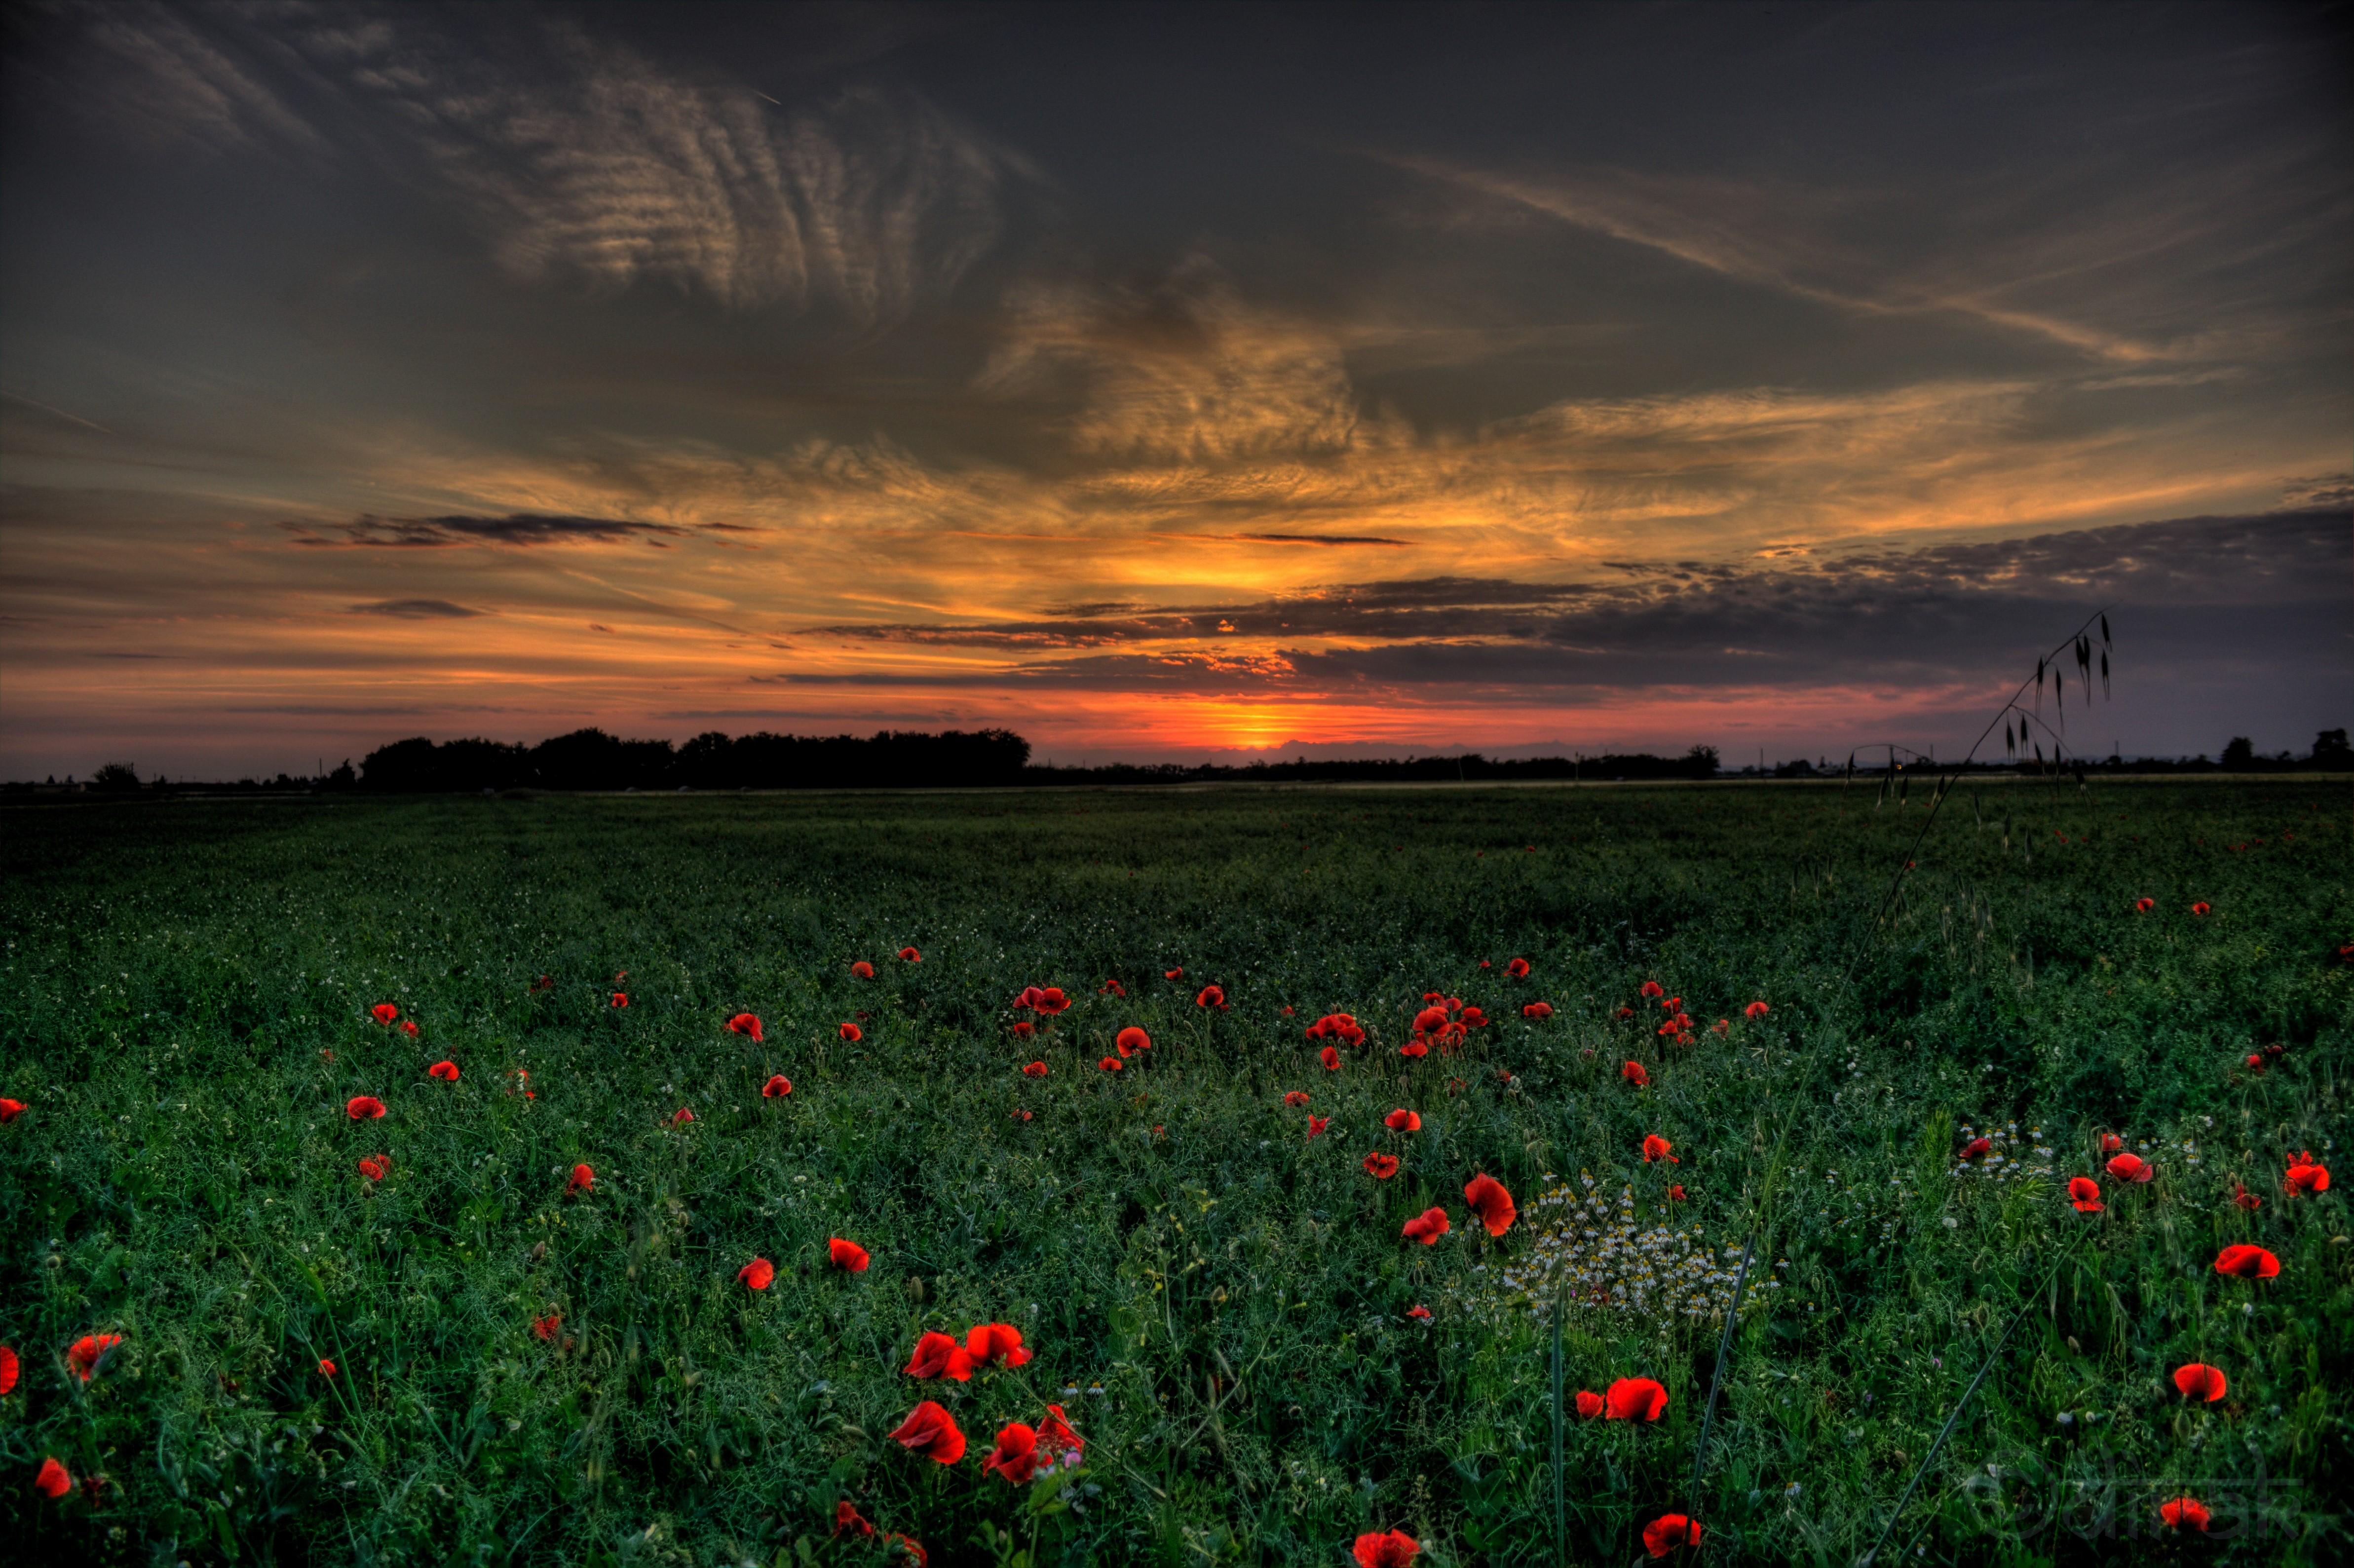 Sunset, Field, Poppies, Landscape wallpaper and background